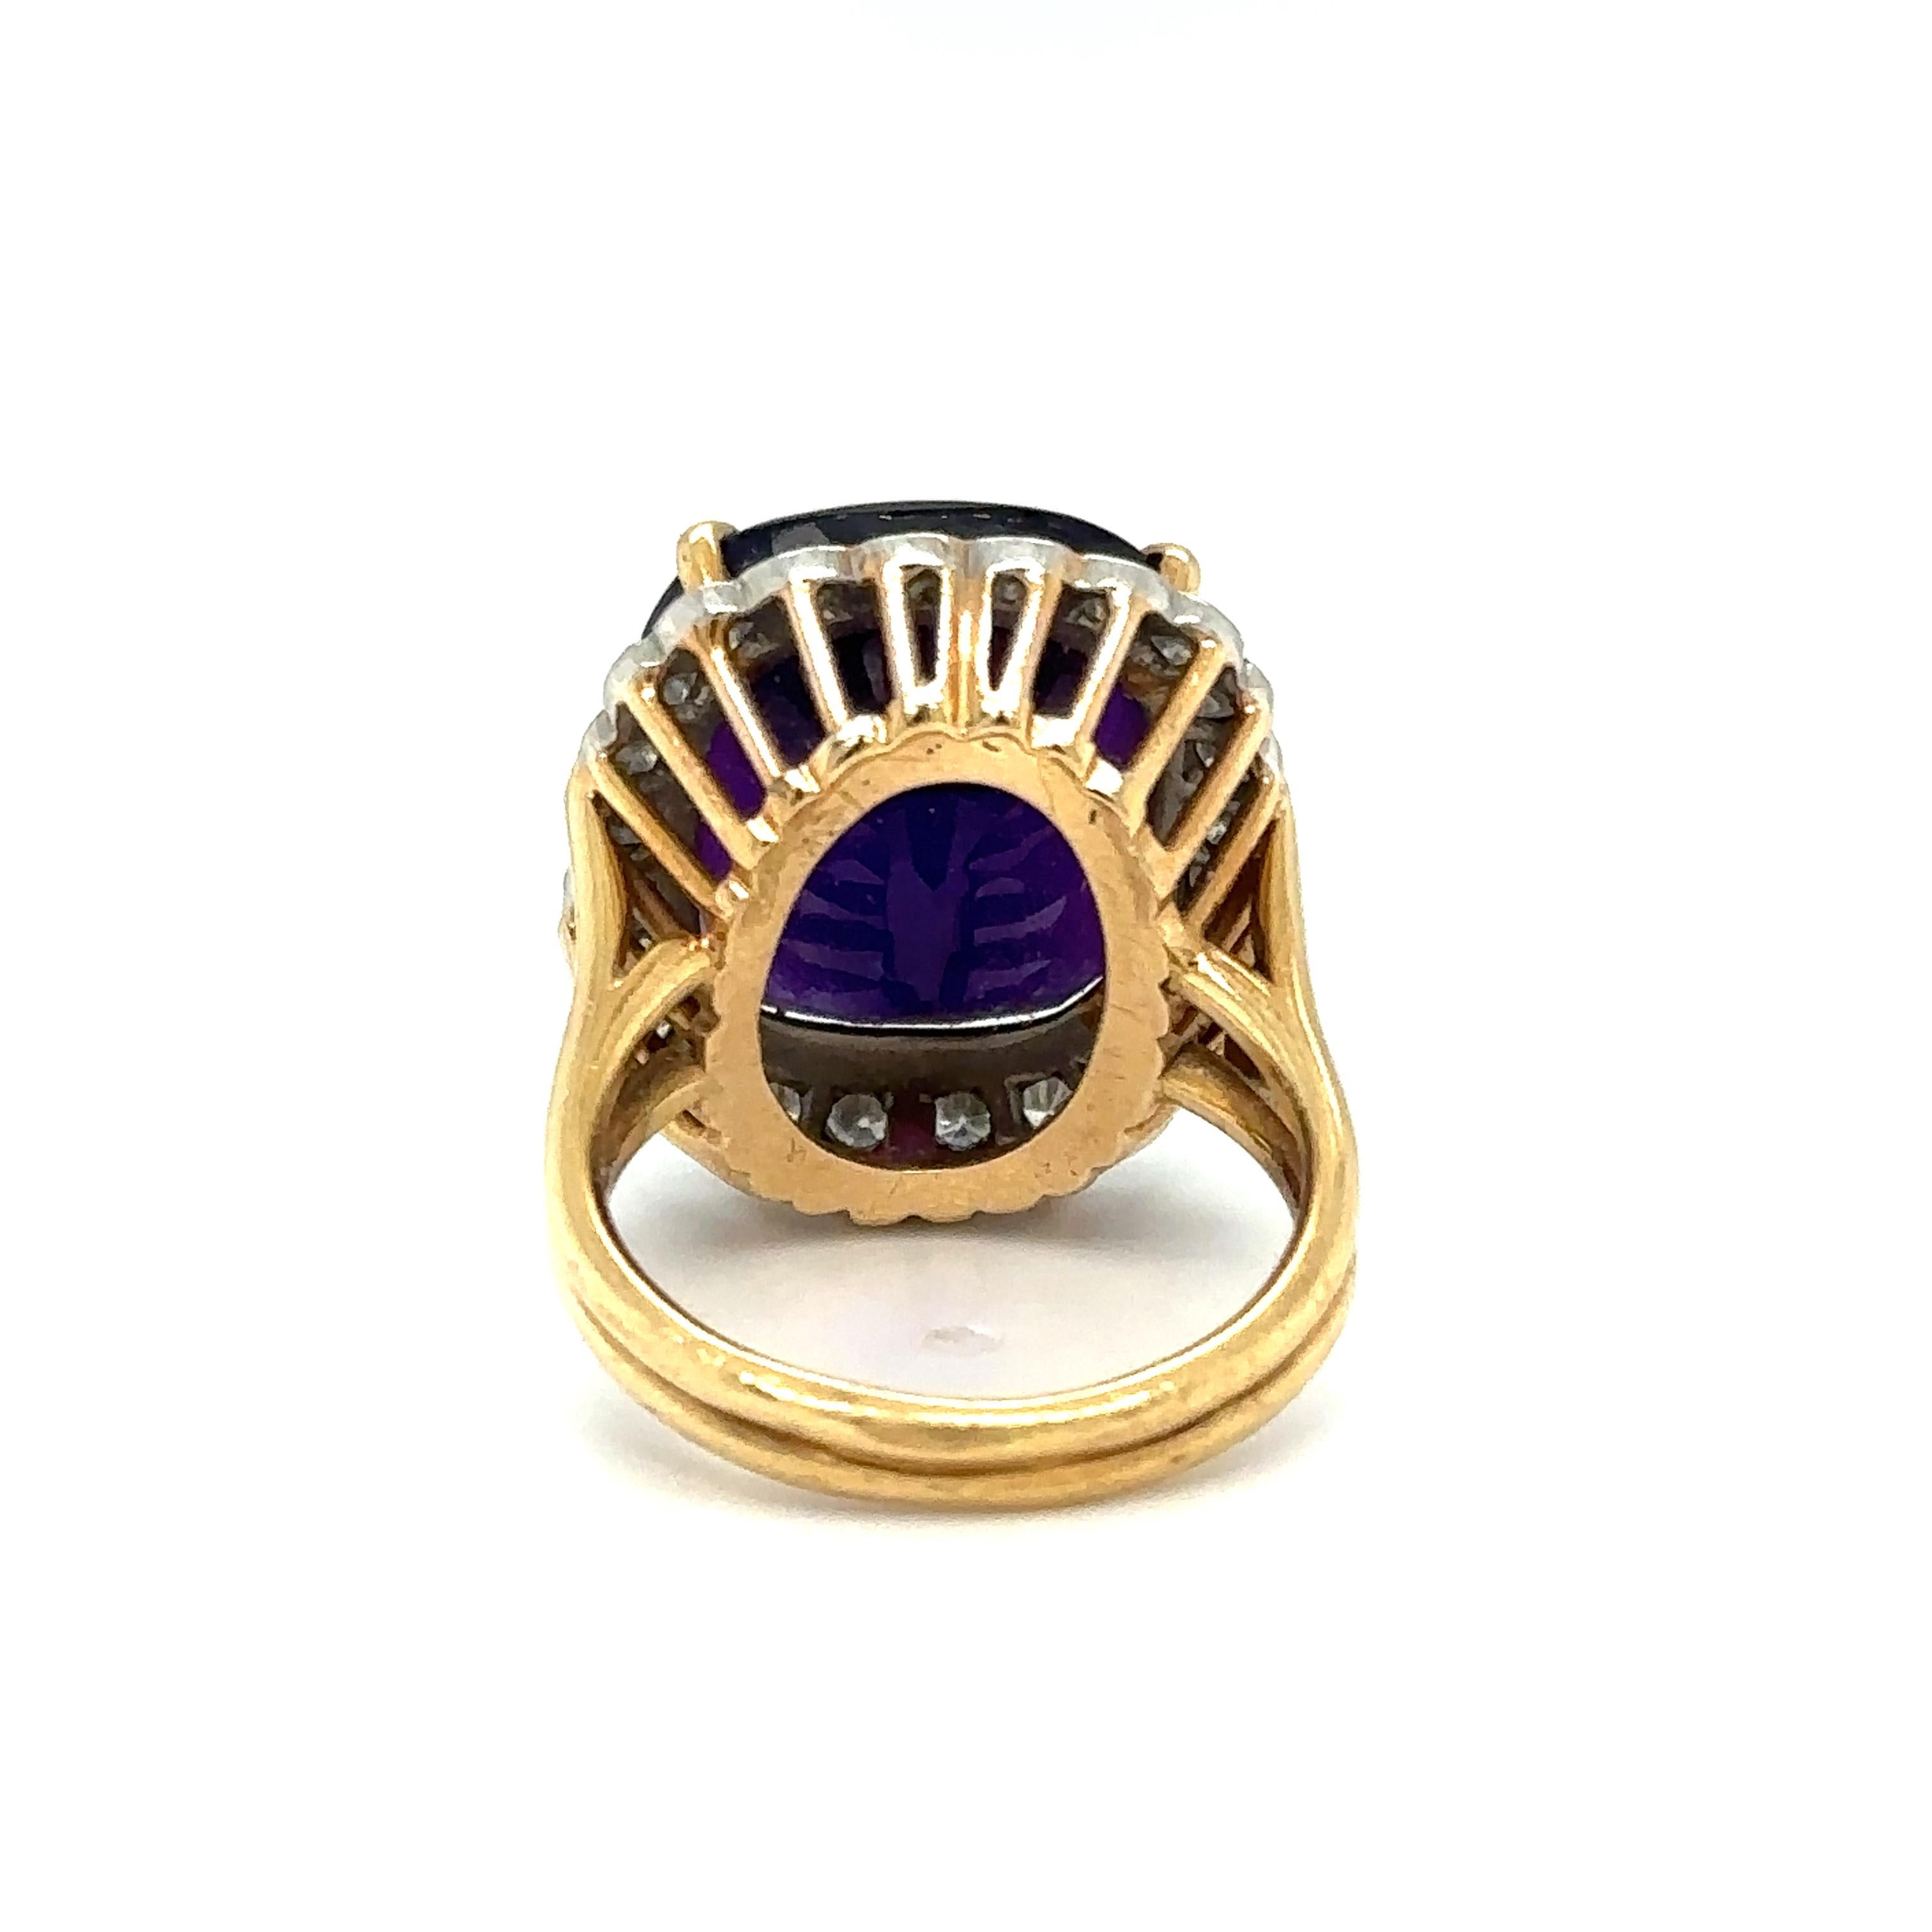 Item Details: This cocktail ring features a center amethyst which is a unique custom checkerboard cut, surrounded by a halo of diamonds. The diamonds are held in white gold prongs, and the amethyst is held in a 4-prong talon prong setting, crafted